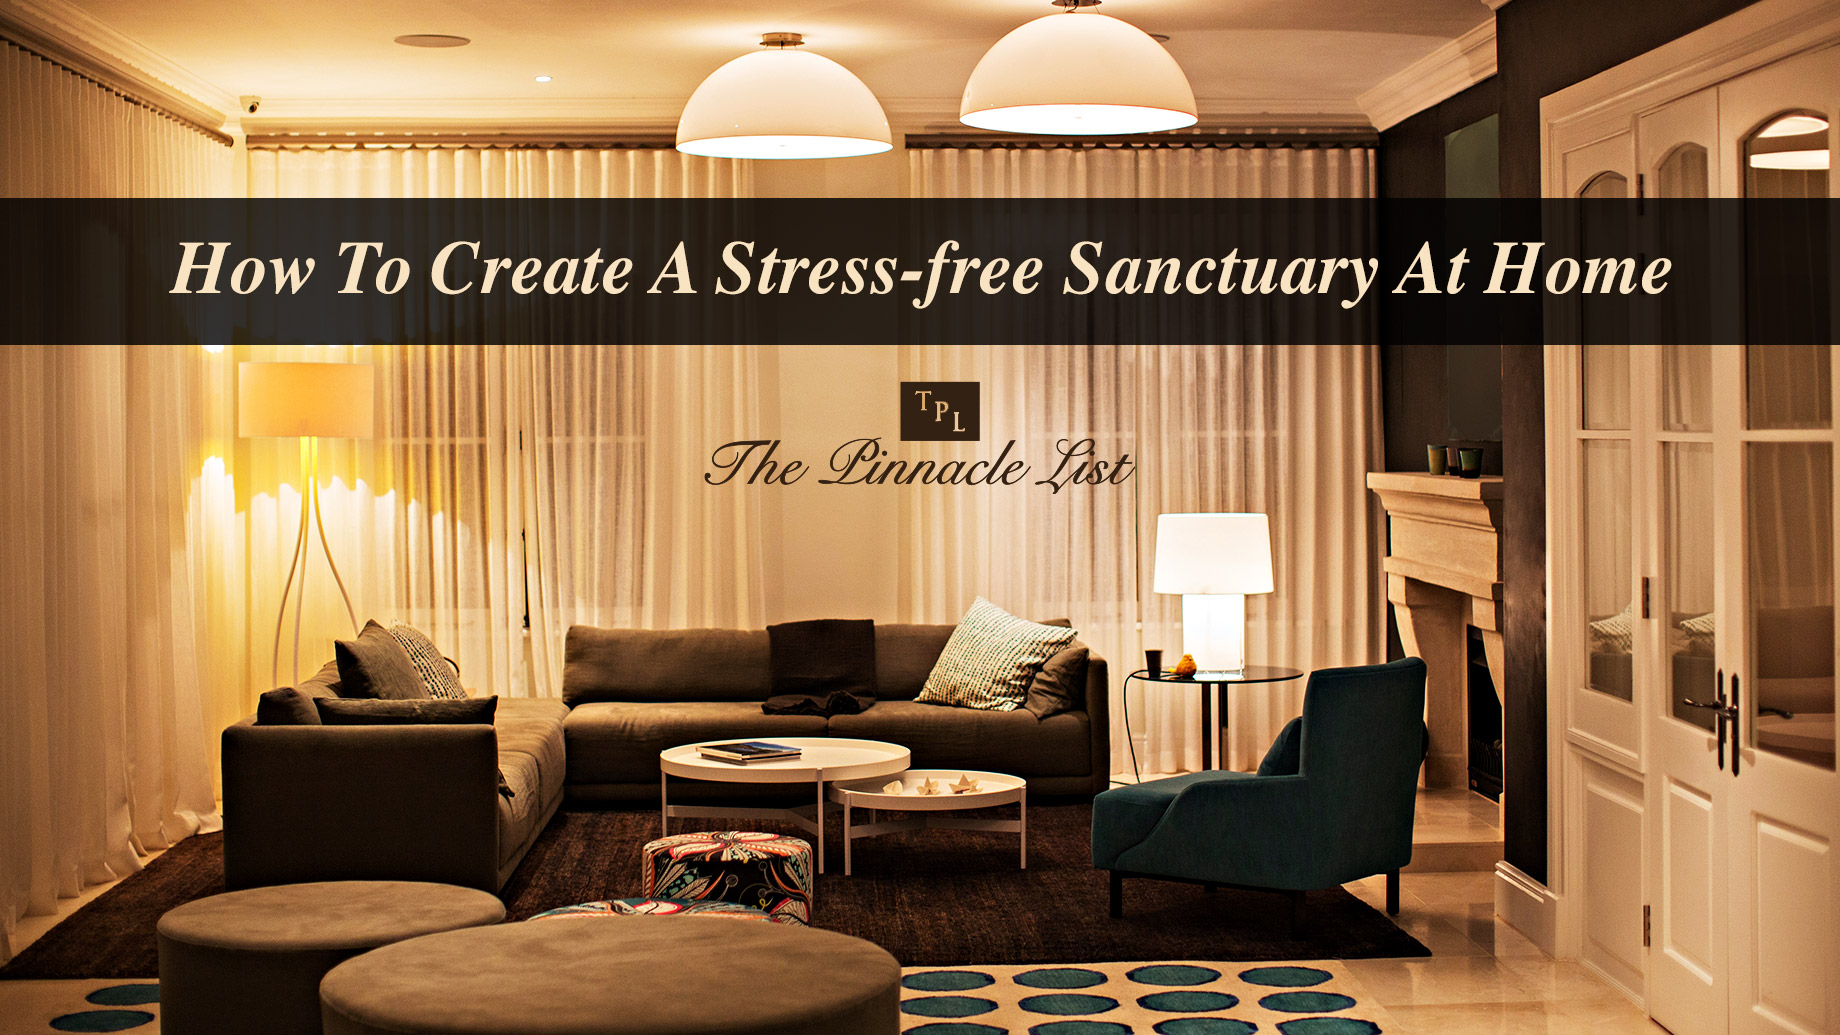 How To Create A Stress-free Sanctuary At Home